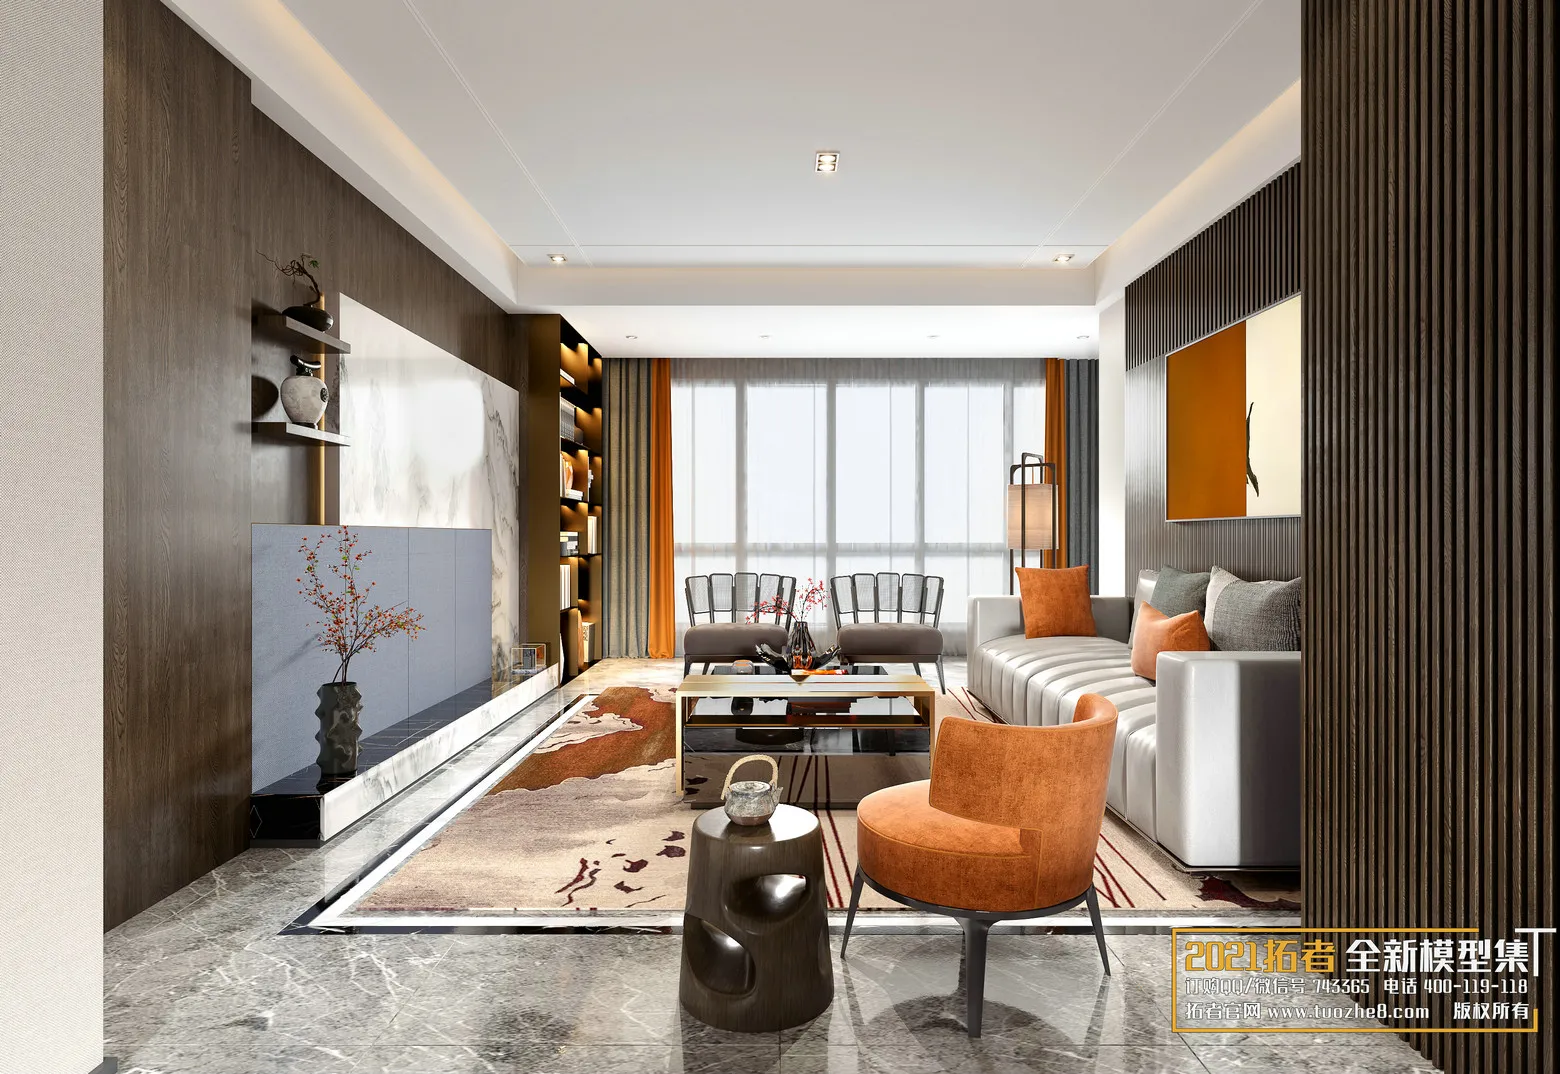 EXTENSION 2021 – 1. LIVING ROOM – 1.2. CHINESE STYLES – 26vr – VRAY